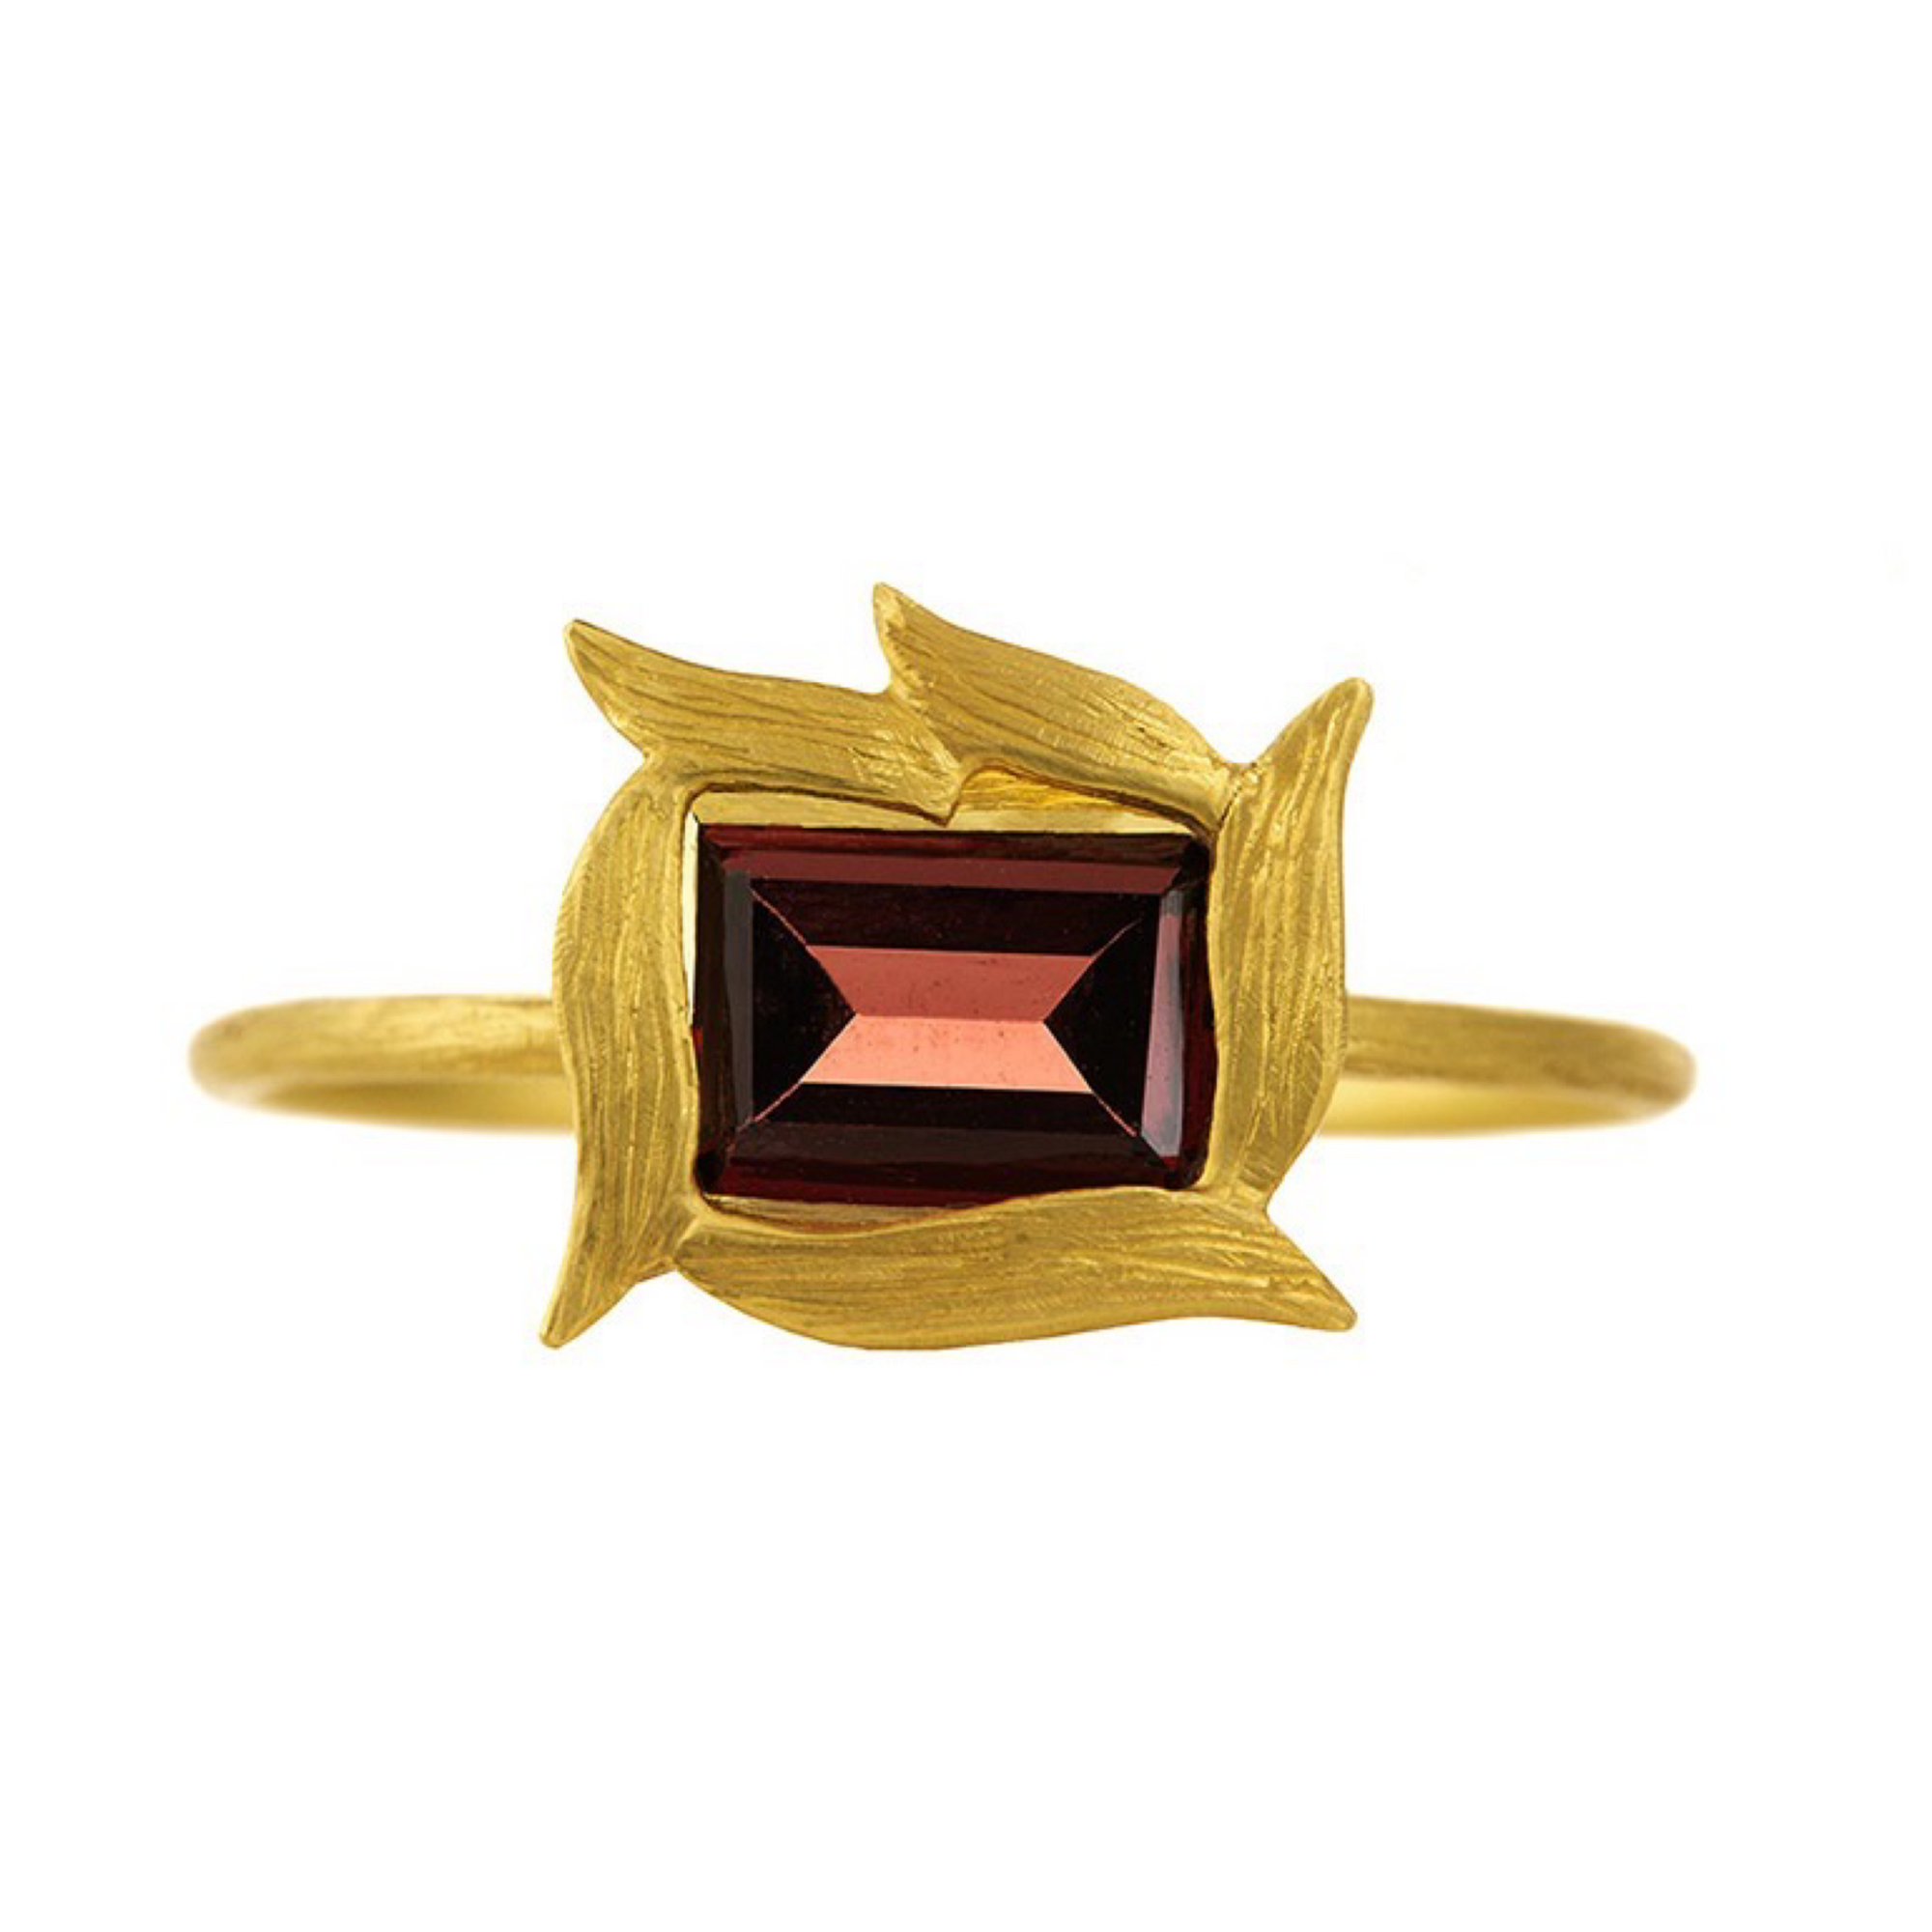 Vine Framed Garnet Ring by Laurie Kaiser available at Talisman Collection Fine Jewelers in El Dorado Hills, CA and online. This Vine Framed Garnet Ring features an emerald-cut garnet that is beautifully surrounded by 18k yellow gold vines on a gold band. The simplicity of the design allows the vibrant color of the garnet to be the centerstage. 